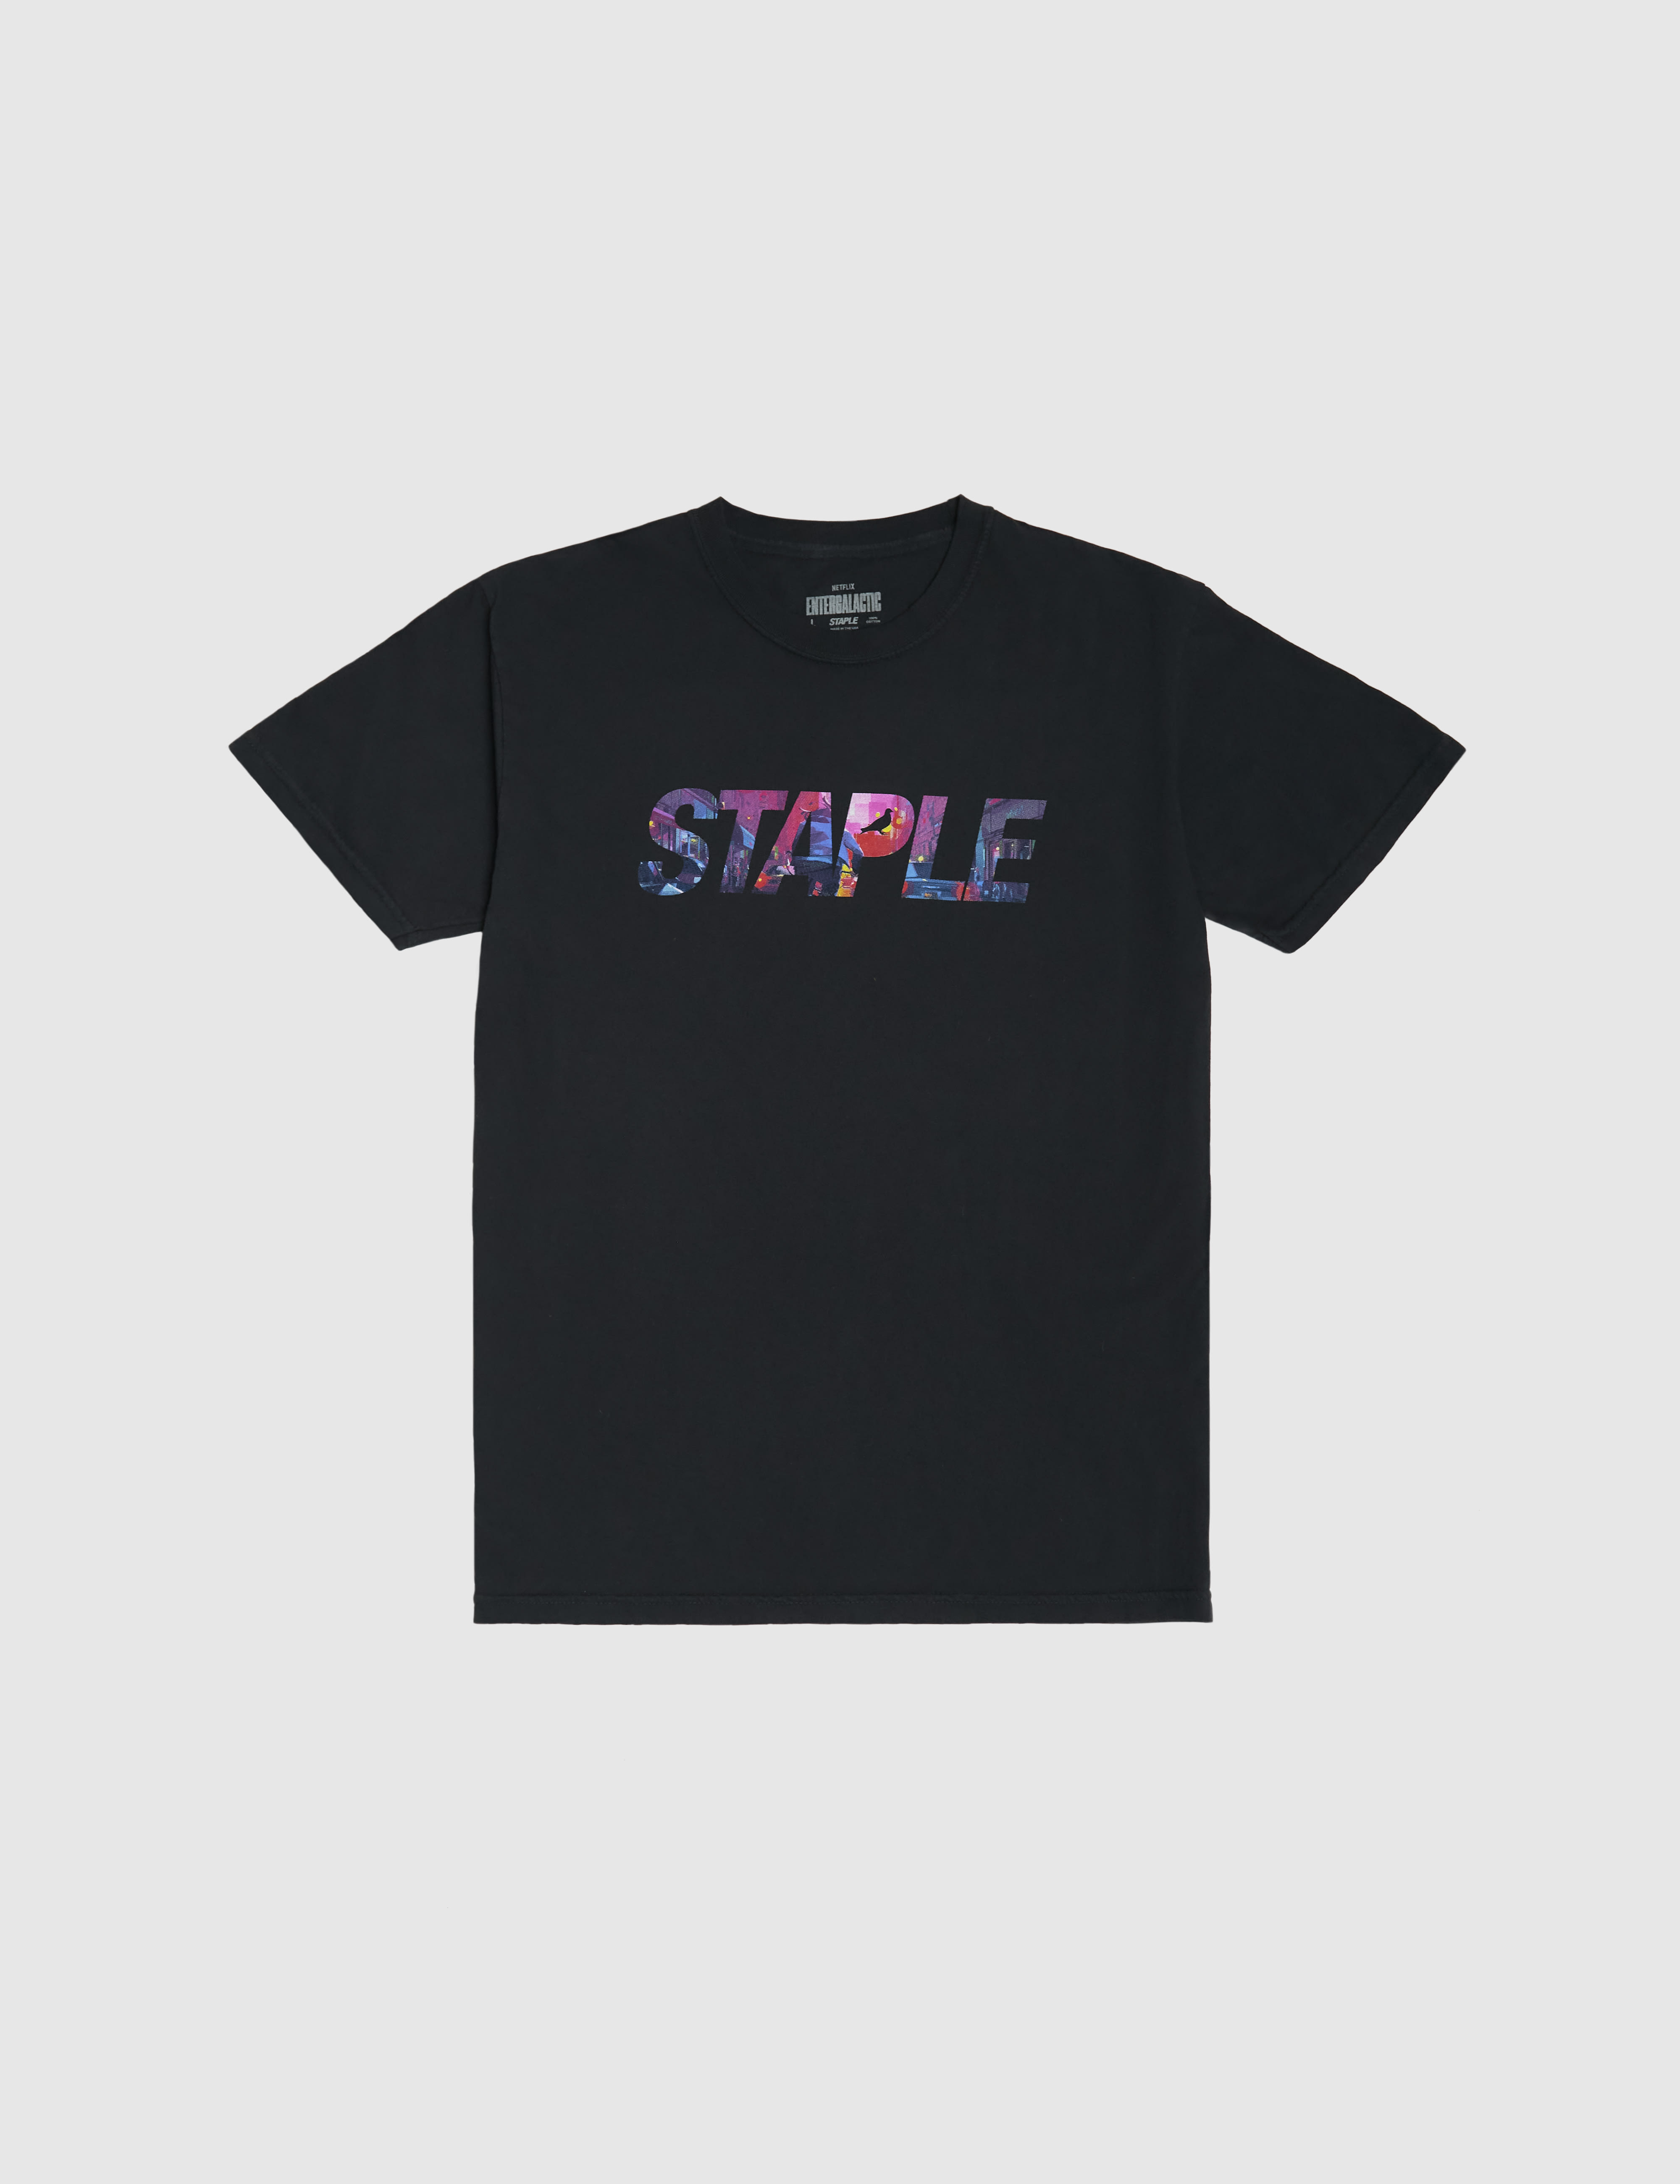 A look at a new Staple design